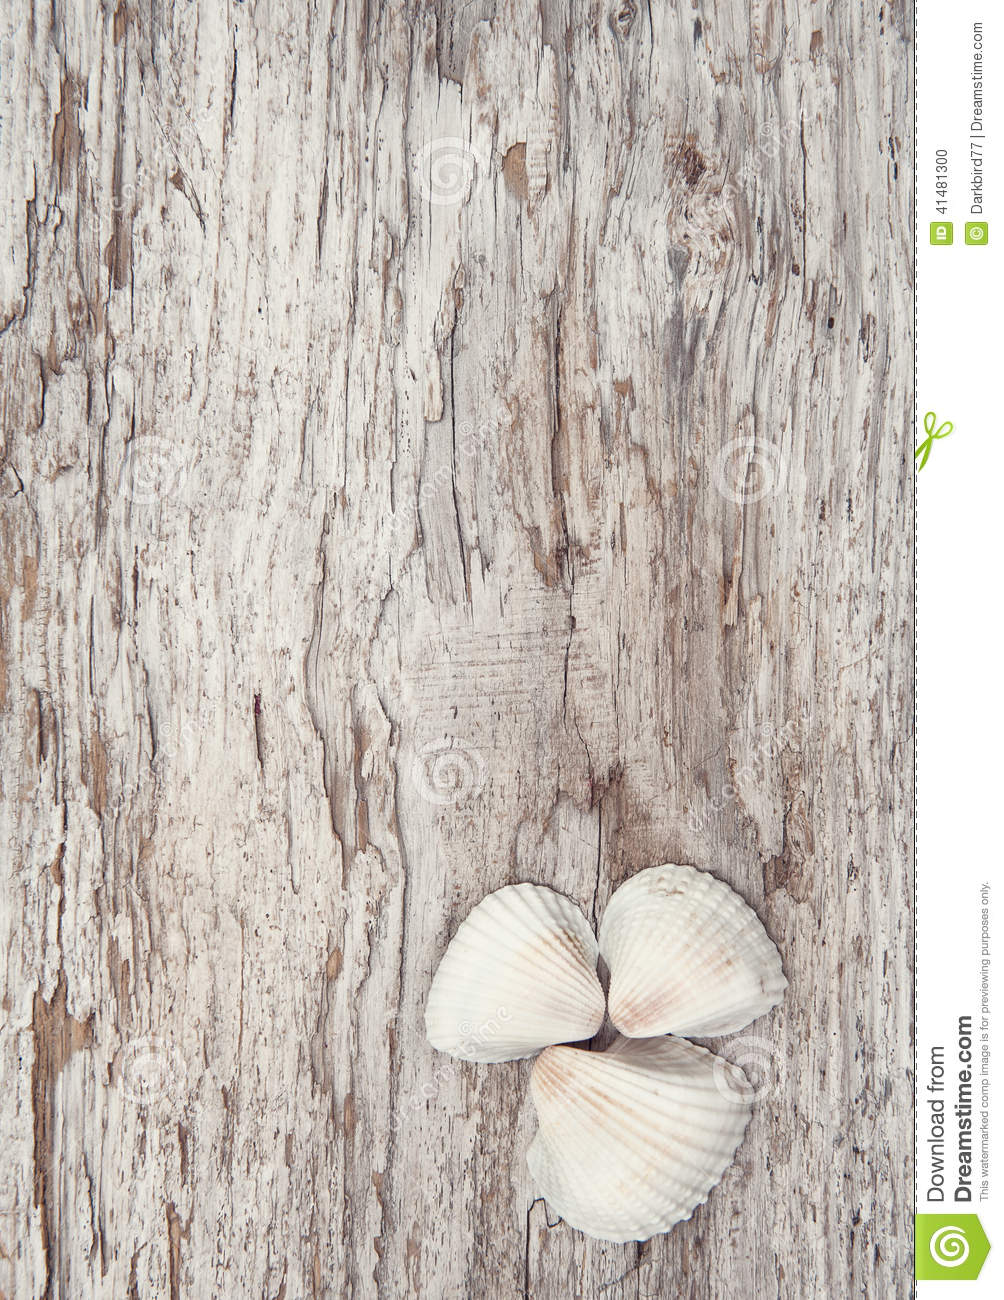 Seashells On The Old Rude Wooden Background